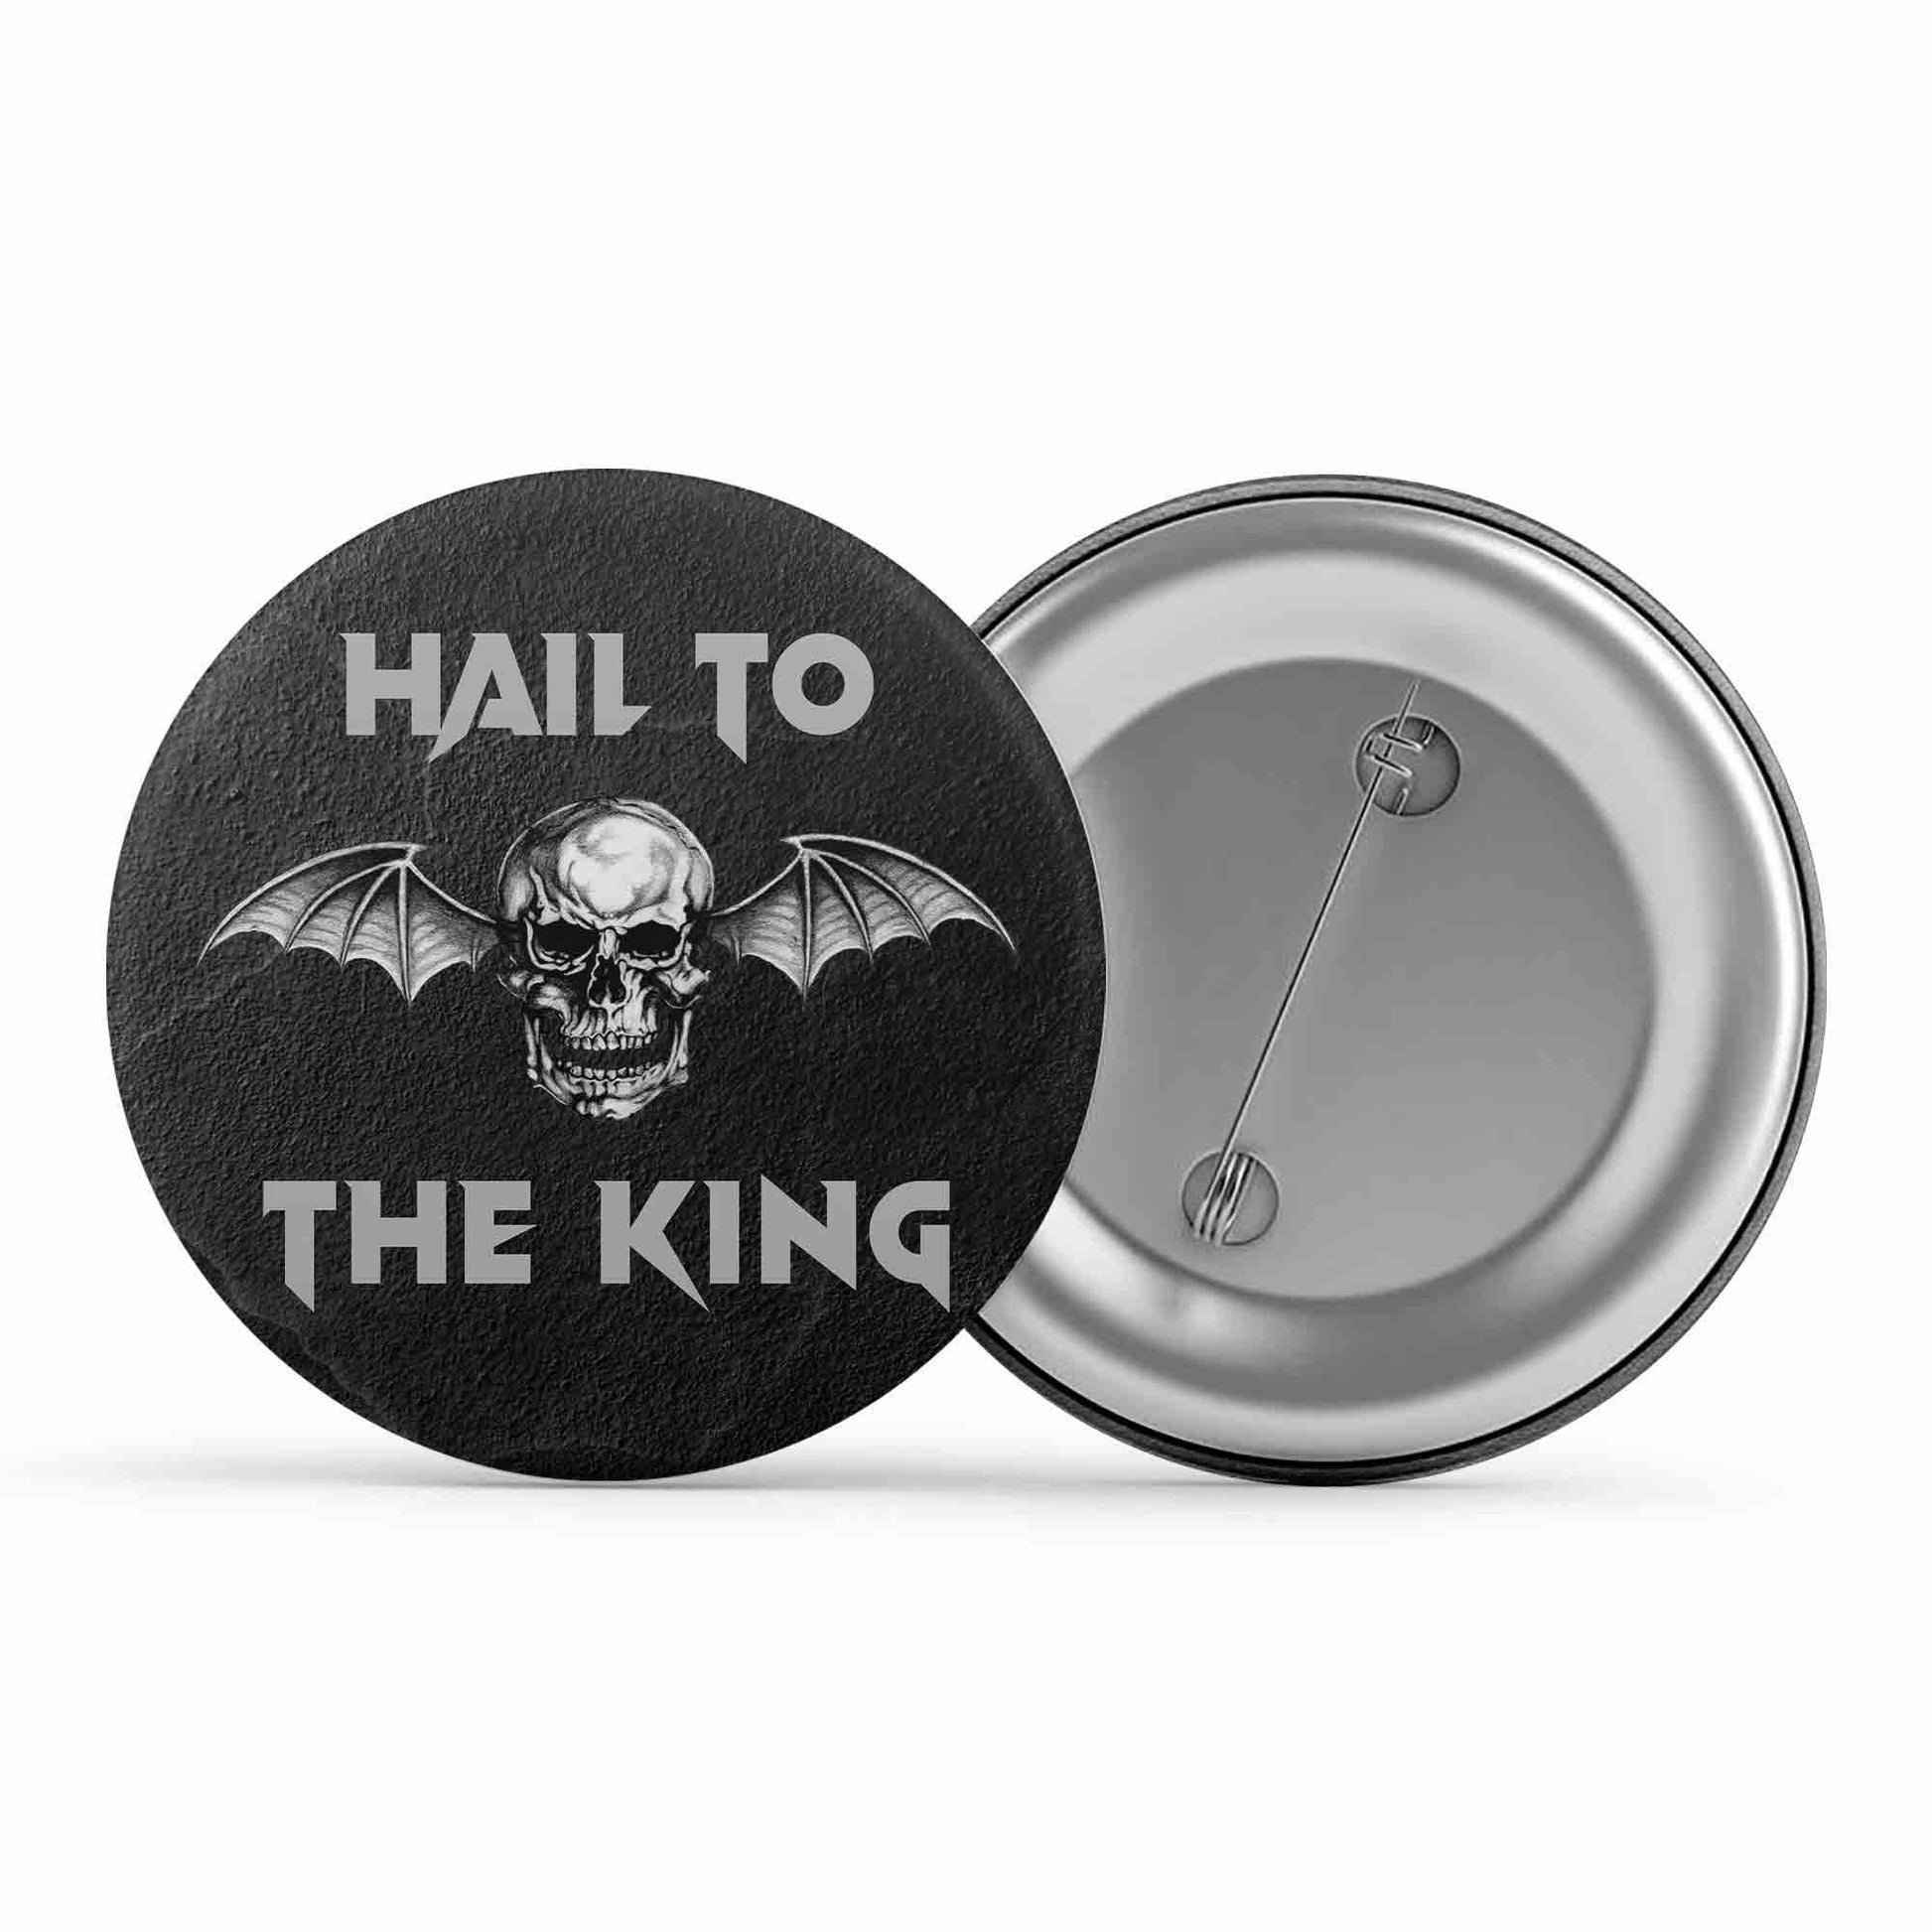 avenged sevenfold hail to the king badge pin button music band buy online india the banyan tee tbt men women girls boys unisex